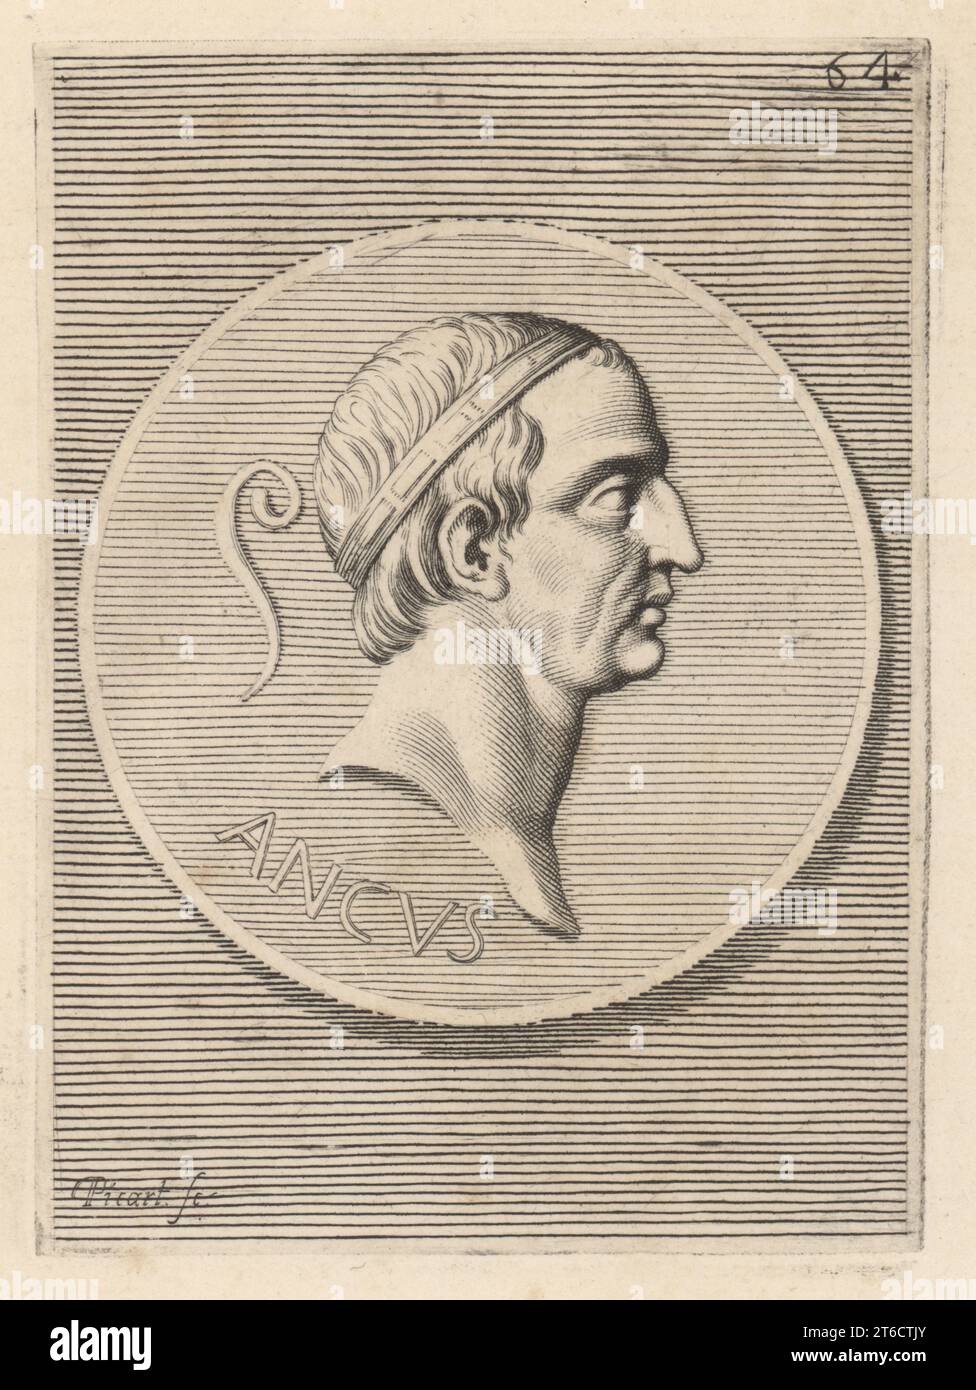 Ancus Martius, legendary fourth king of Rome, who reigned for 24 years. Son of Marcius and Pompilia, Numa Pompilius's daughter. Head wearing diadem from a silver denarius coin. Anco Martio IV Re di Roma. Copperplate engraving by Etienne Picart after Giovanni Angelo Canini from Iconografia, cioe disegni d'imagini de famosissimi monarchi, regi, filososi, poeti ed oratori dell' Antichita, Drawings of images of famous monarchs, kings, philosophers, poets and orators of Antiquity, Ignatio deLazari, Rome, 1699. Stock Photo